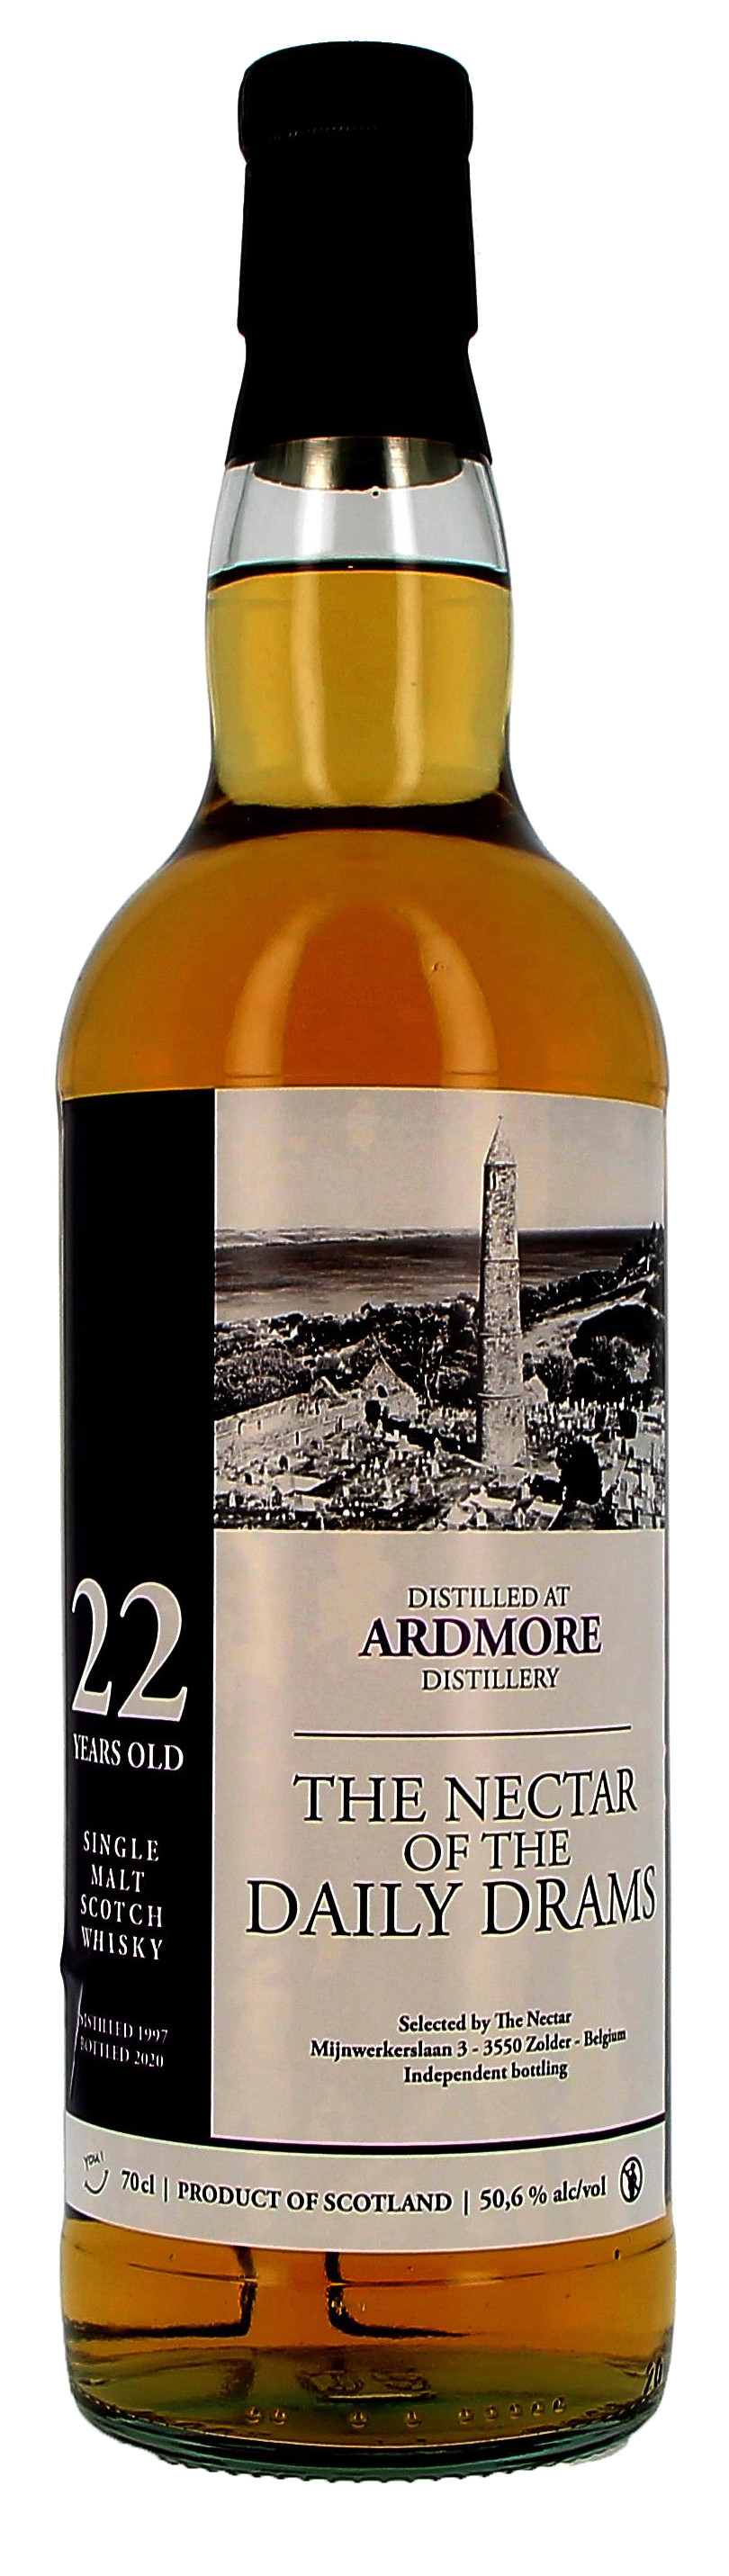 Ardmore 22 Ans d'Age Daily Dram 1997 70cl 50.6% Highland Single Malt Whisky Ecosse (Whisky)